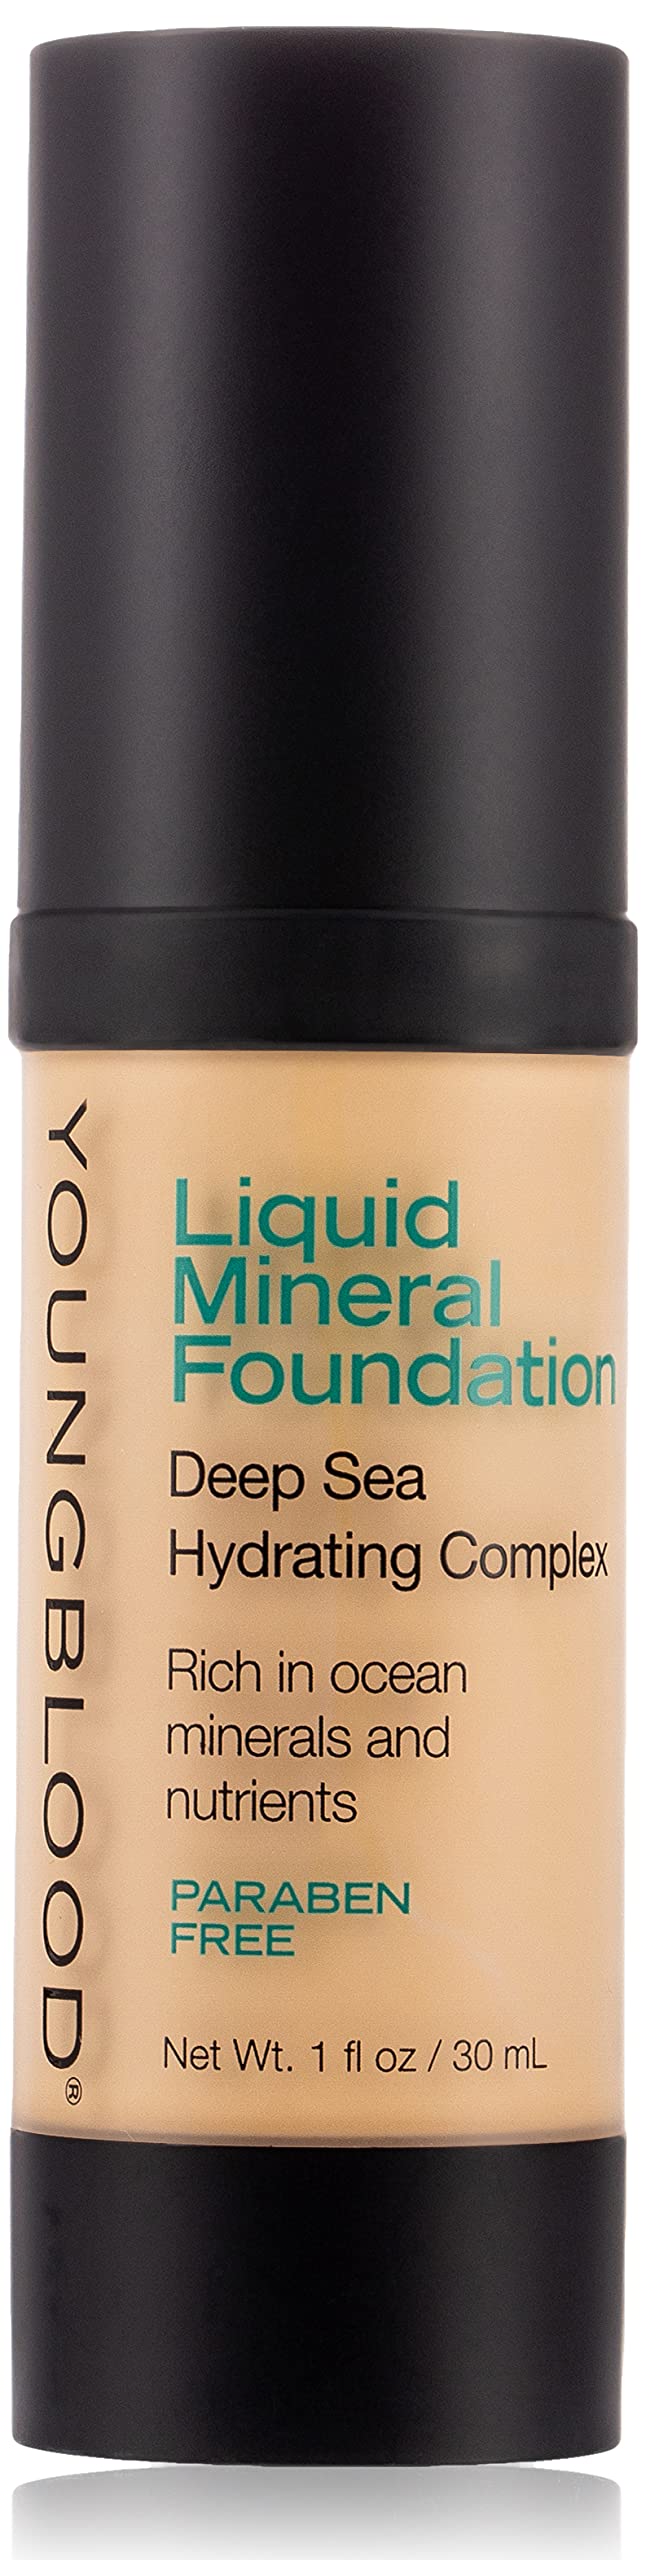 Youngblood Clean Luxury Cosmetics Liquid Mineral Foundation, Shell | Dewy Mineral Lightweight Full Coverage Makeup for Dry Skin Poreless Flawless Tinted Glow | Vegan, Cruelty Free, Gluten-Free